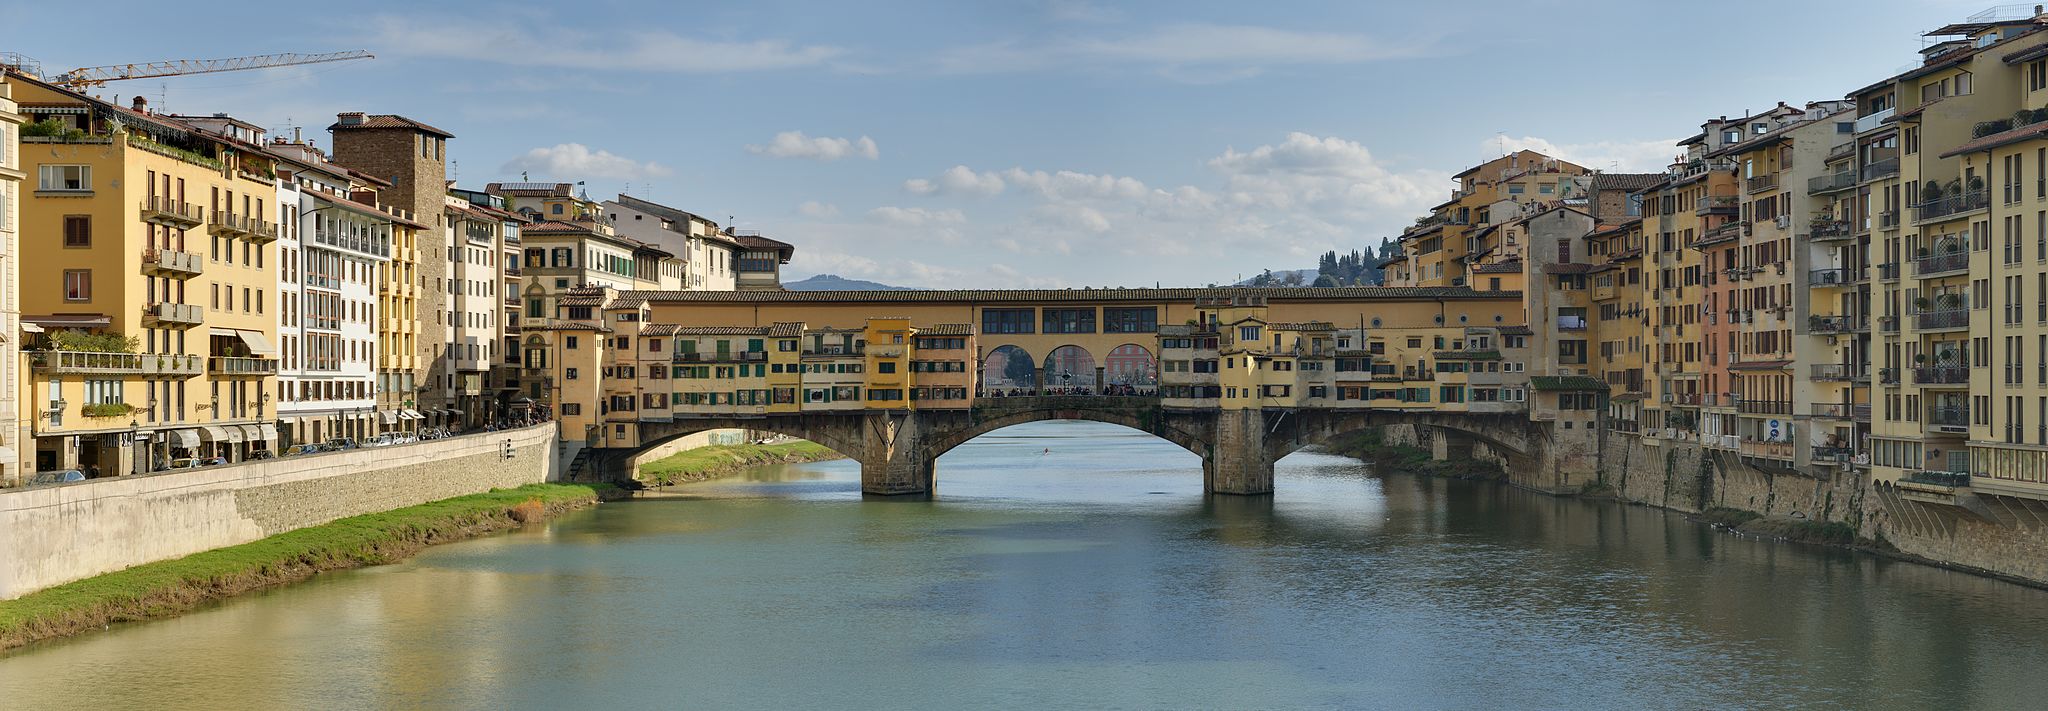 Panorama_of_the_Ponte_Vecchio_in_Florence,_Italy